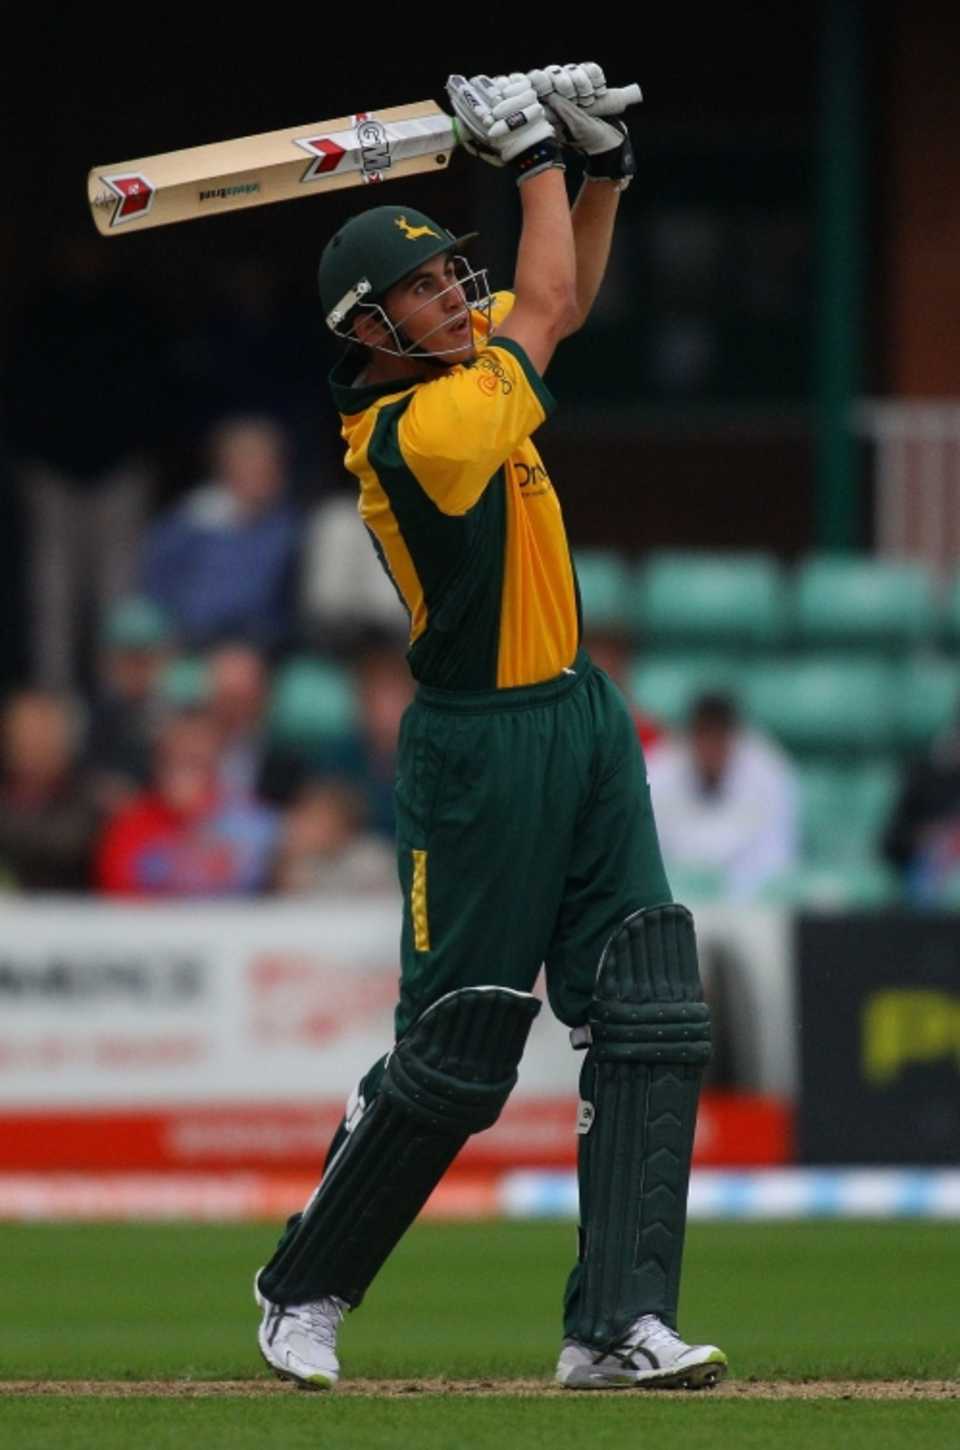 Alex Hales powered Nottinghamshire to a six-wicket win with an unbeaten 66, Worcestershire v Nottinghamshire, Friends Provident t20, Worcester, June 10, 2010